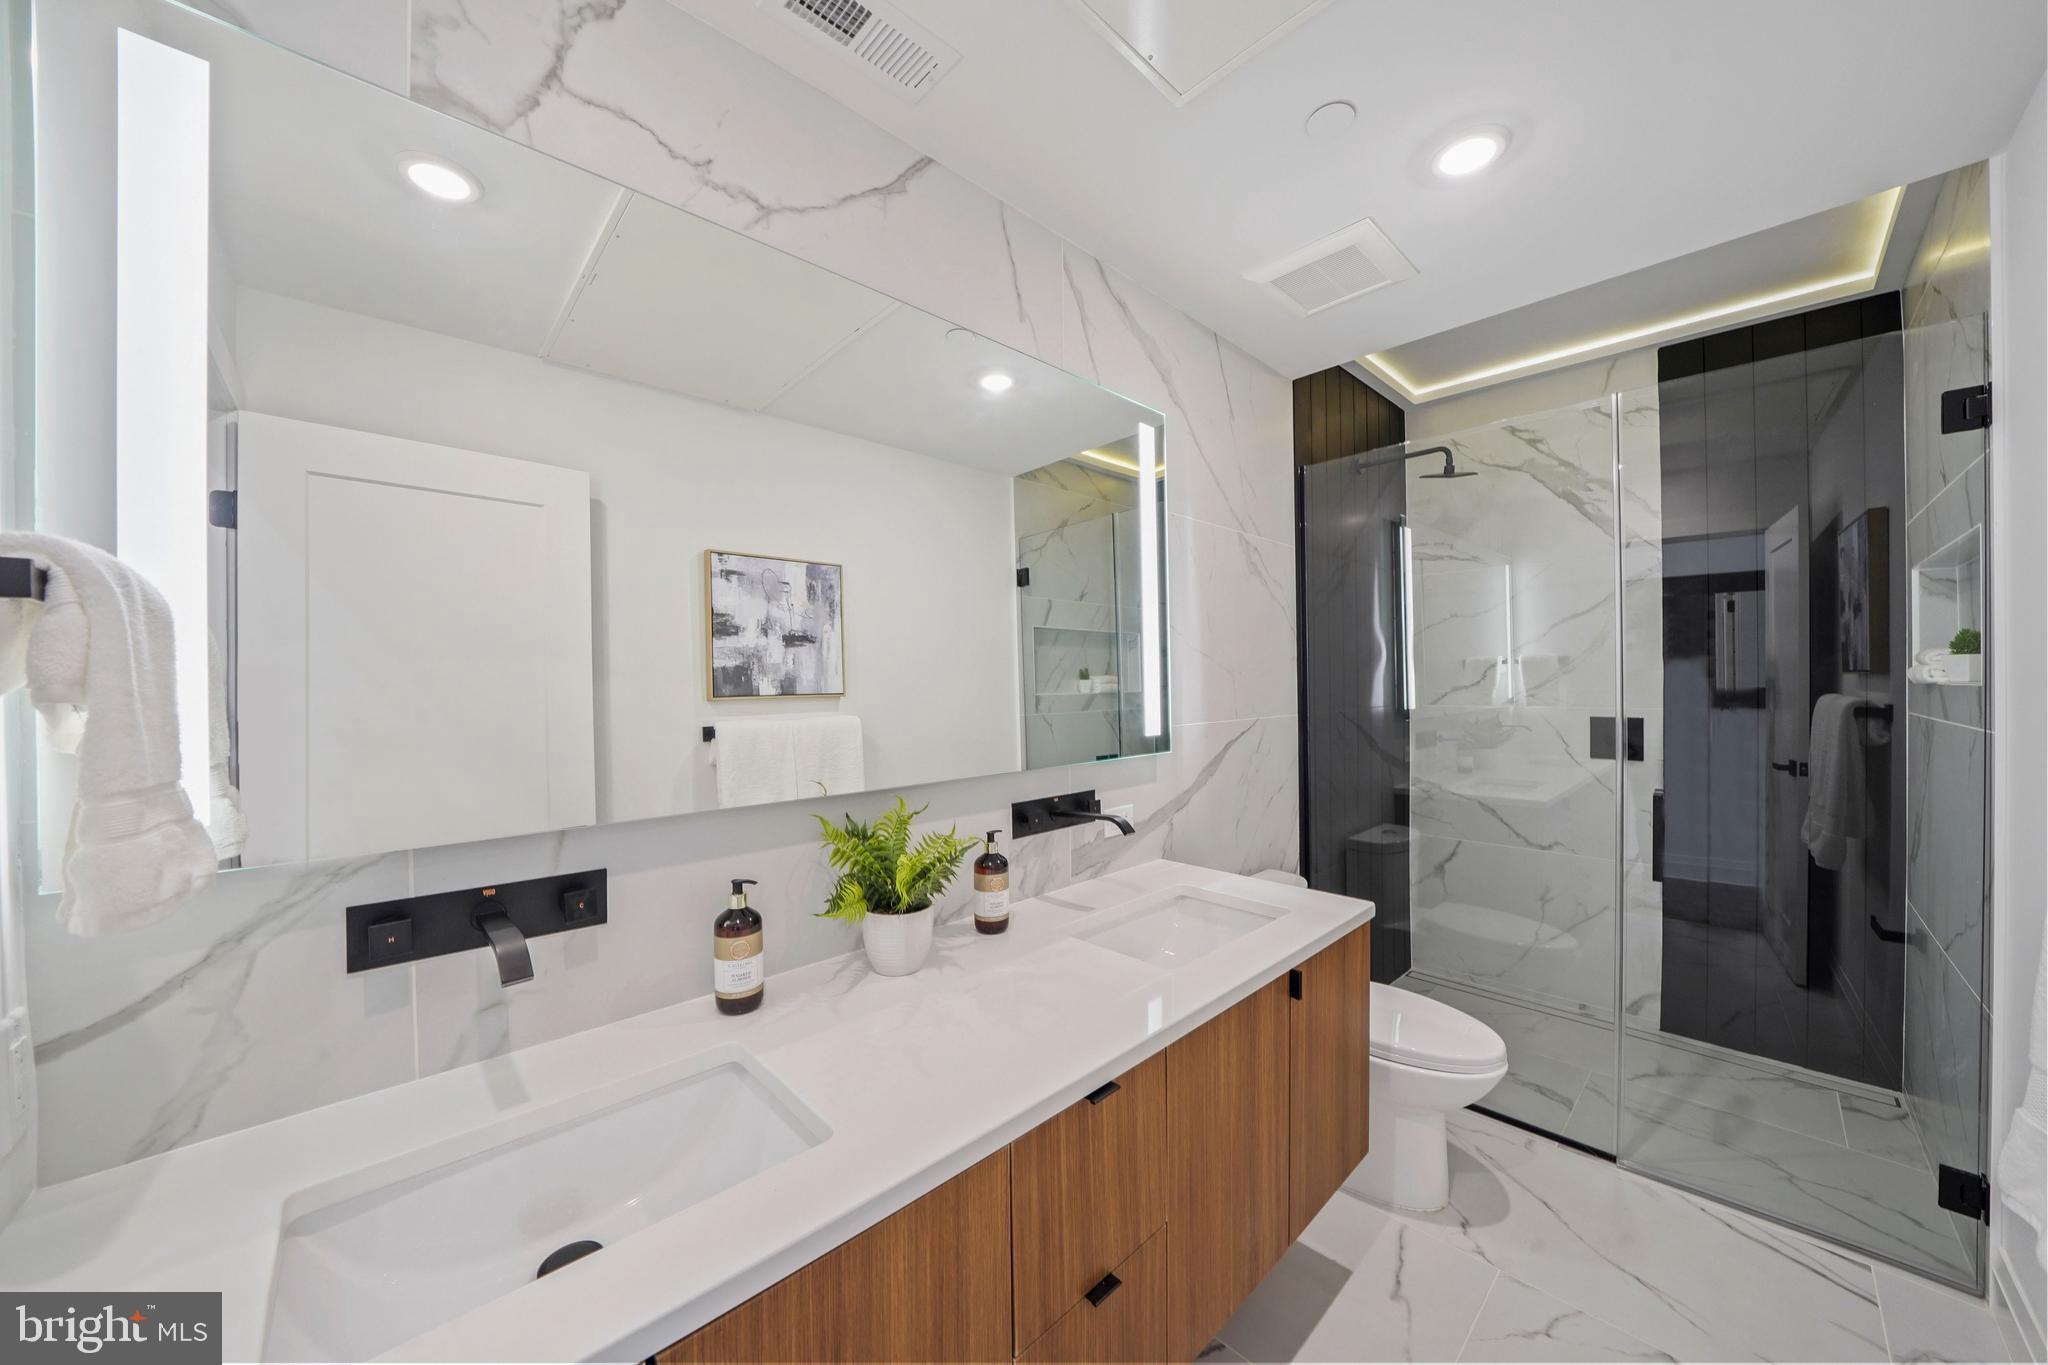 a spacious bathroom with a granite countertop sink a toilet and shower